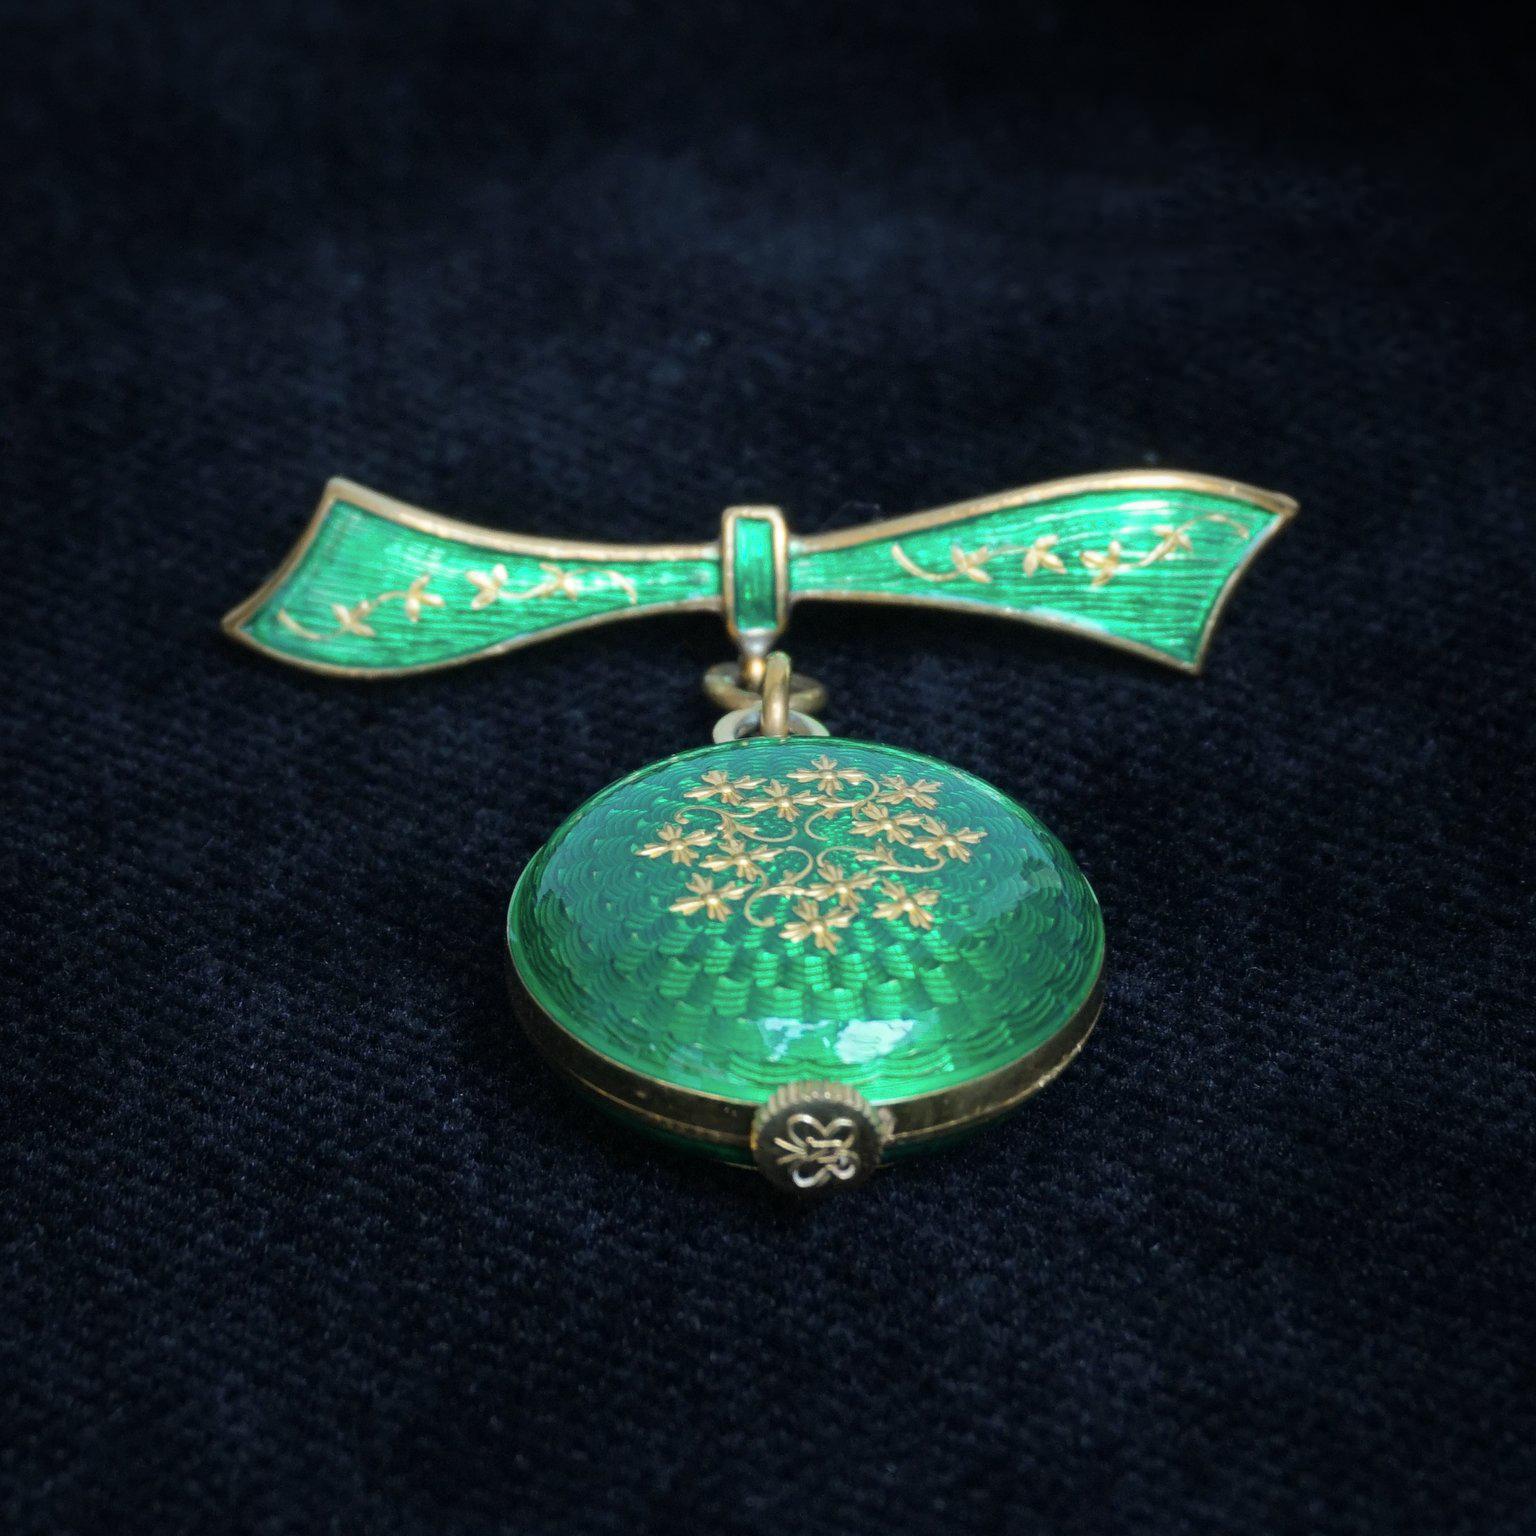 20th Century 1930s Swiss Watch Brooch by Nadine with Green Guilloche Enamel on Gilt Silver